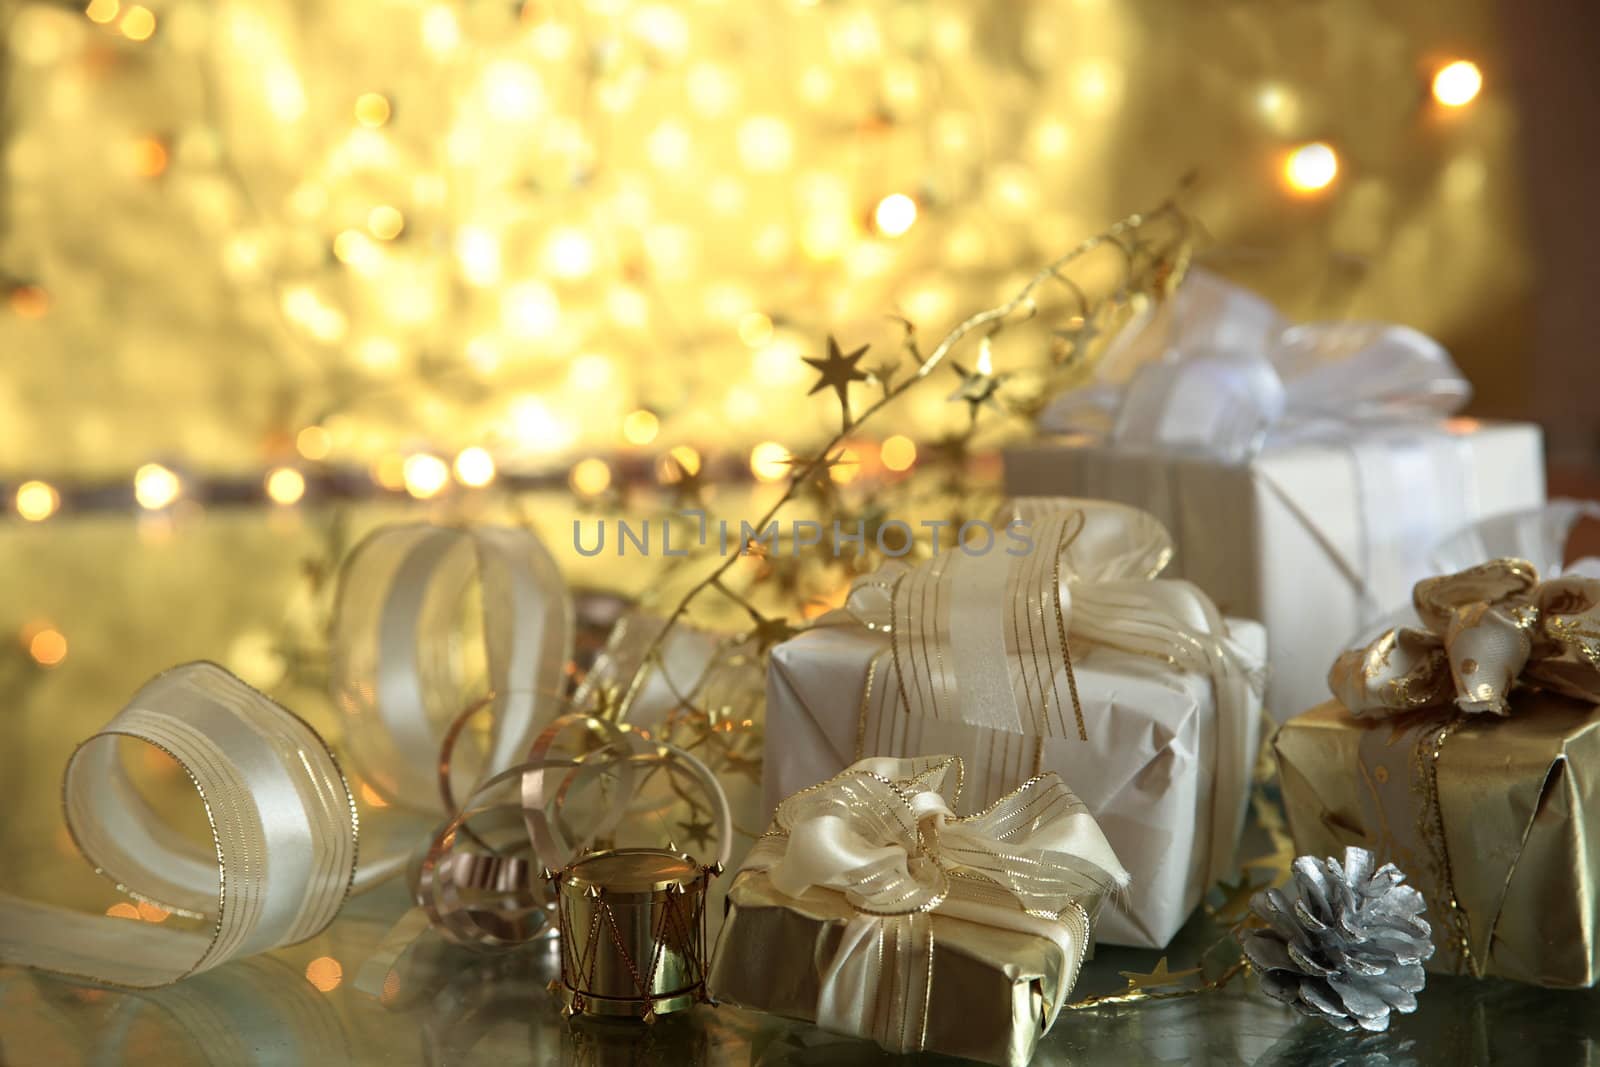 Closeup of gift boxes on golden background with blurred lights.